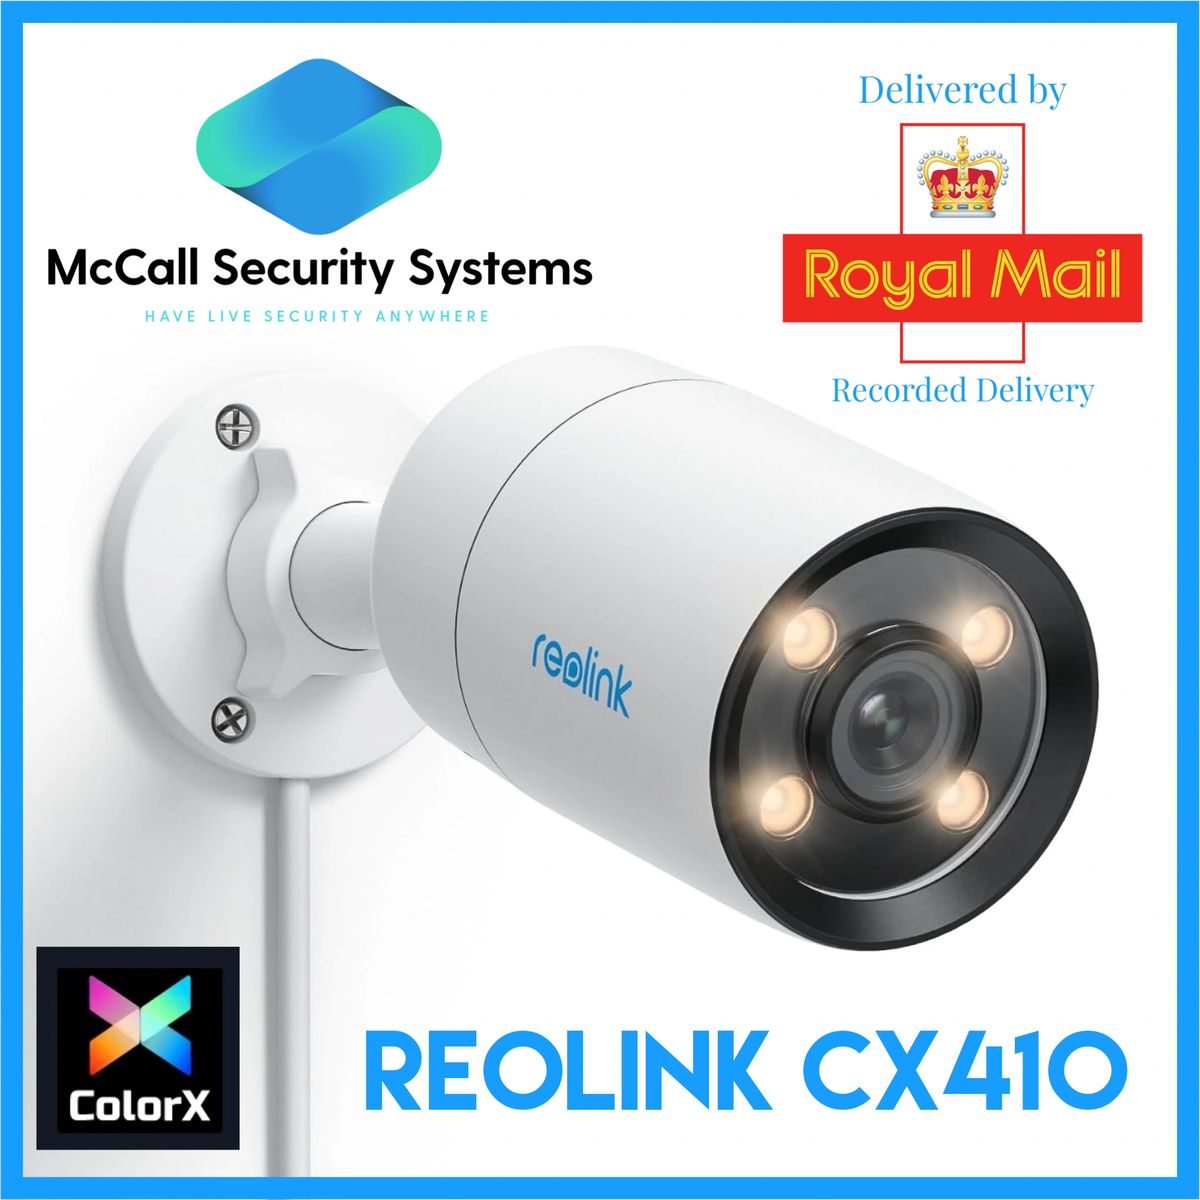 Reolink's CX410 2K security cam features color night vision